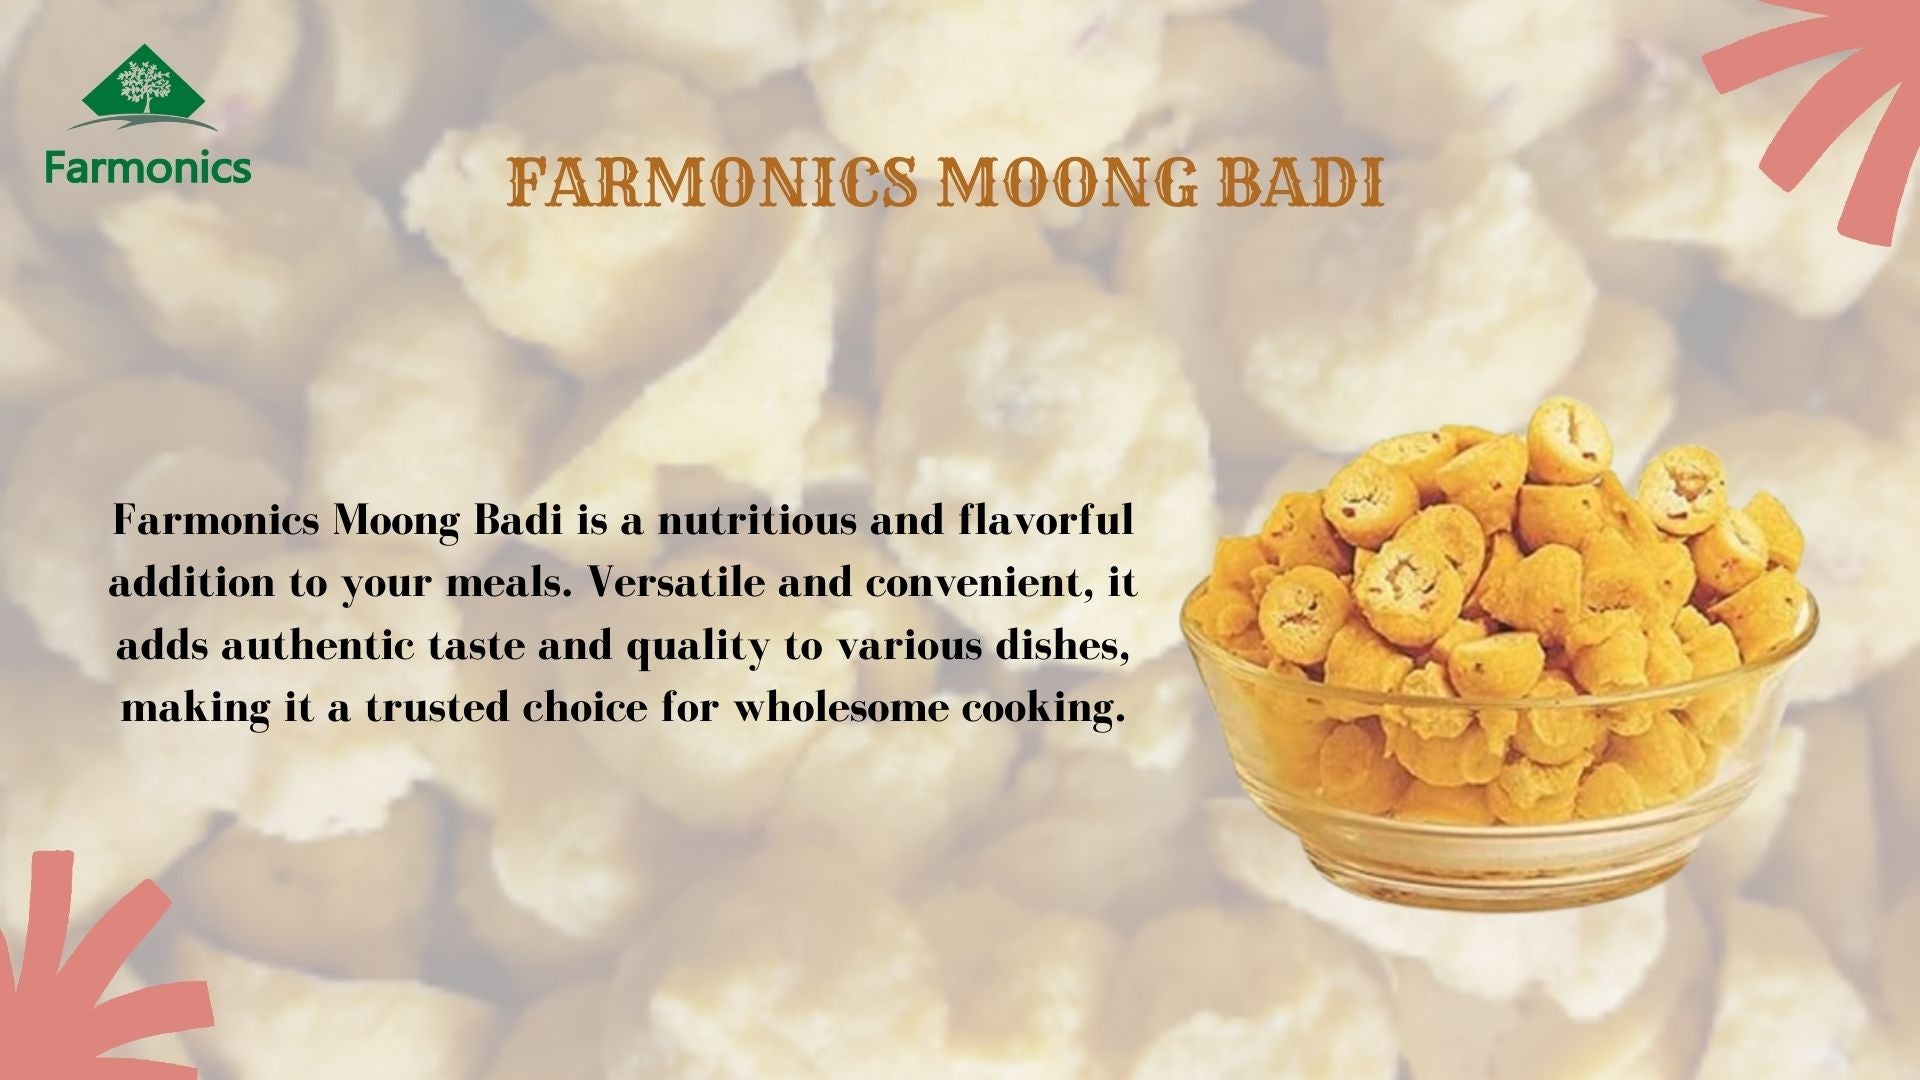 here are some of the information about Farmonics unadultered moong badi 